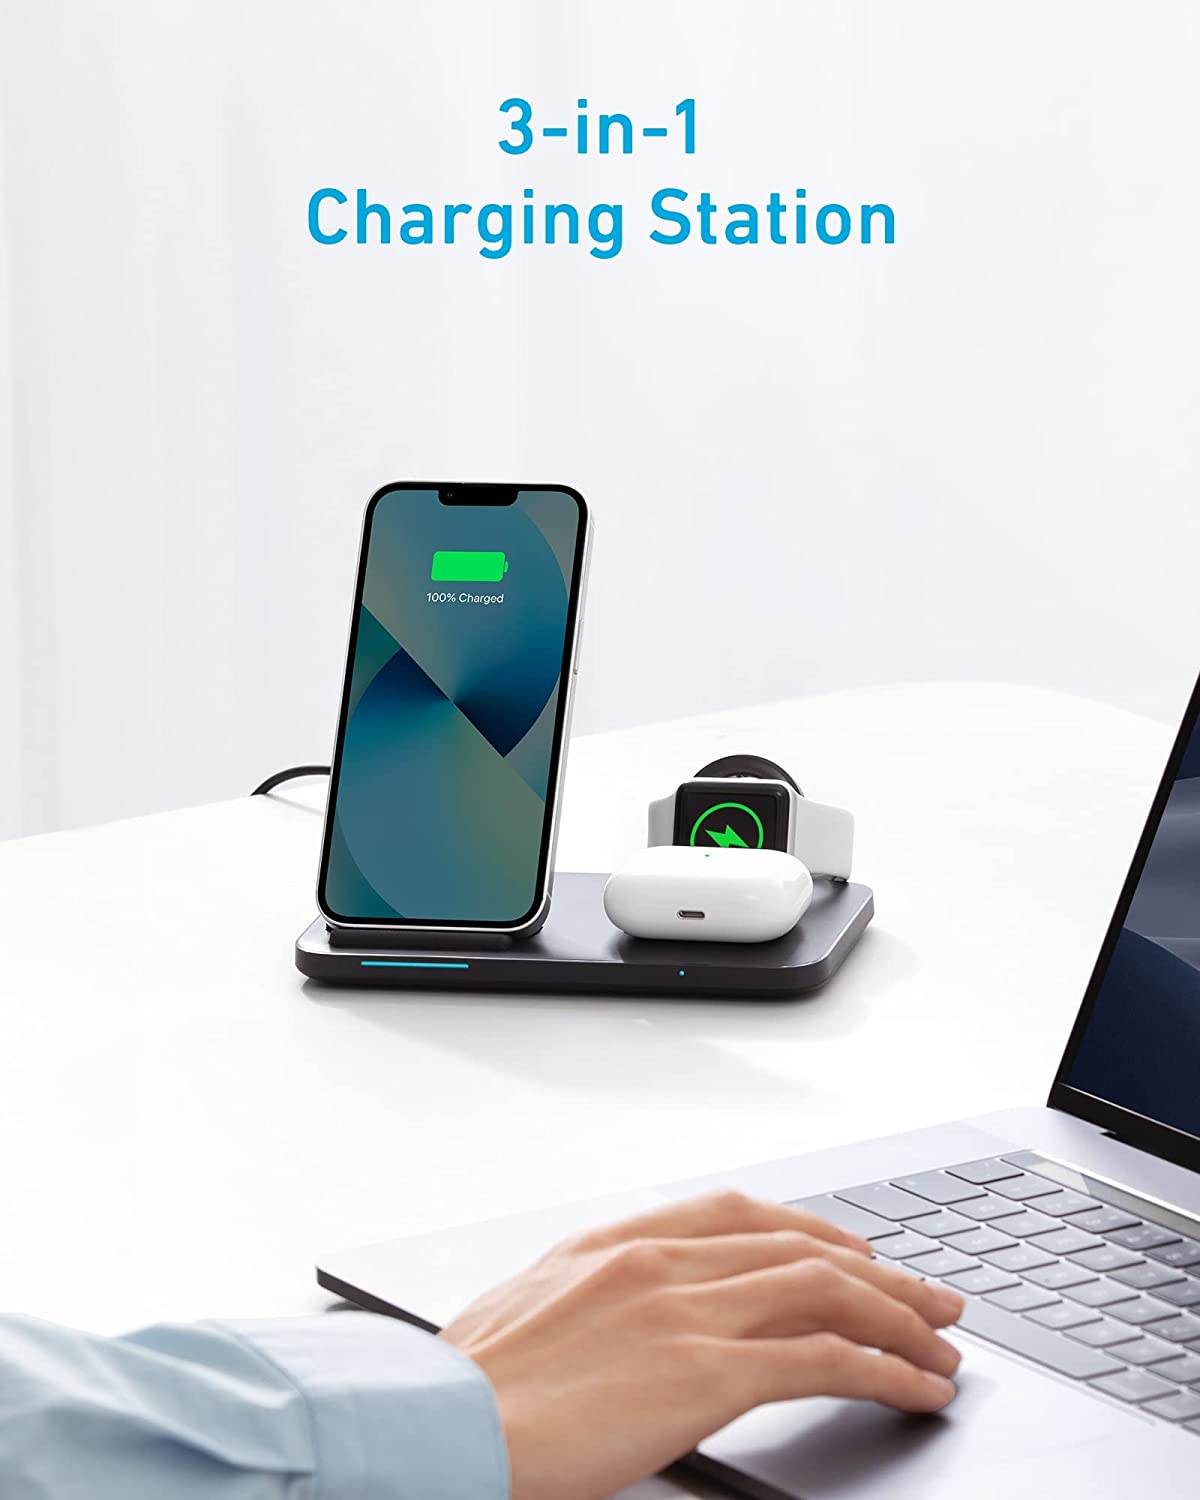 SAVE 25% OFF on Anker 335 Wireless Charger (3-in-1 Station) $22.49